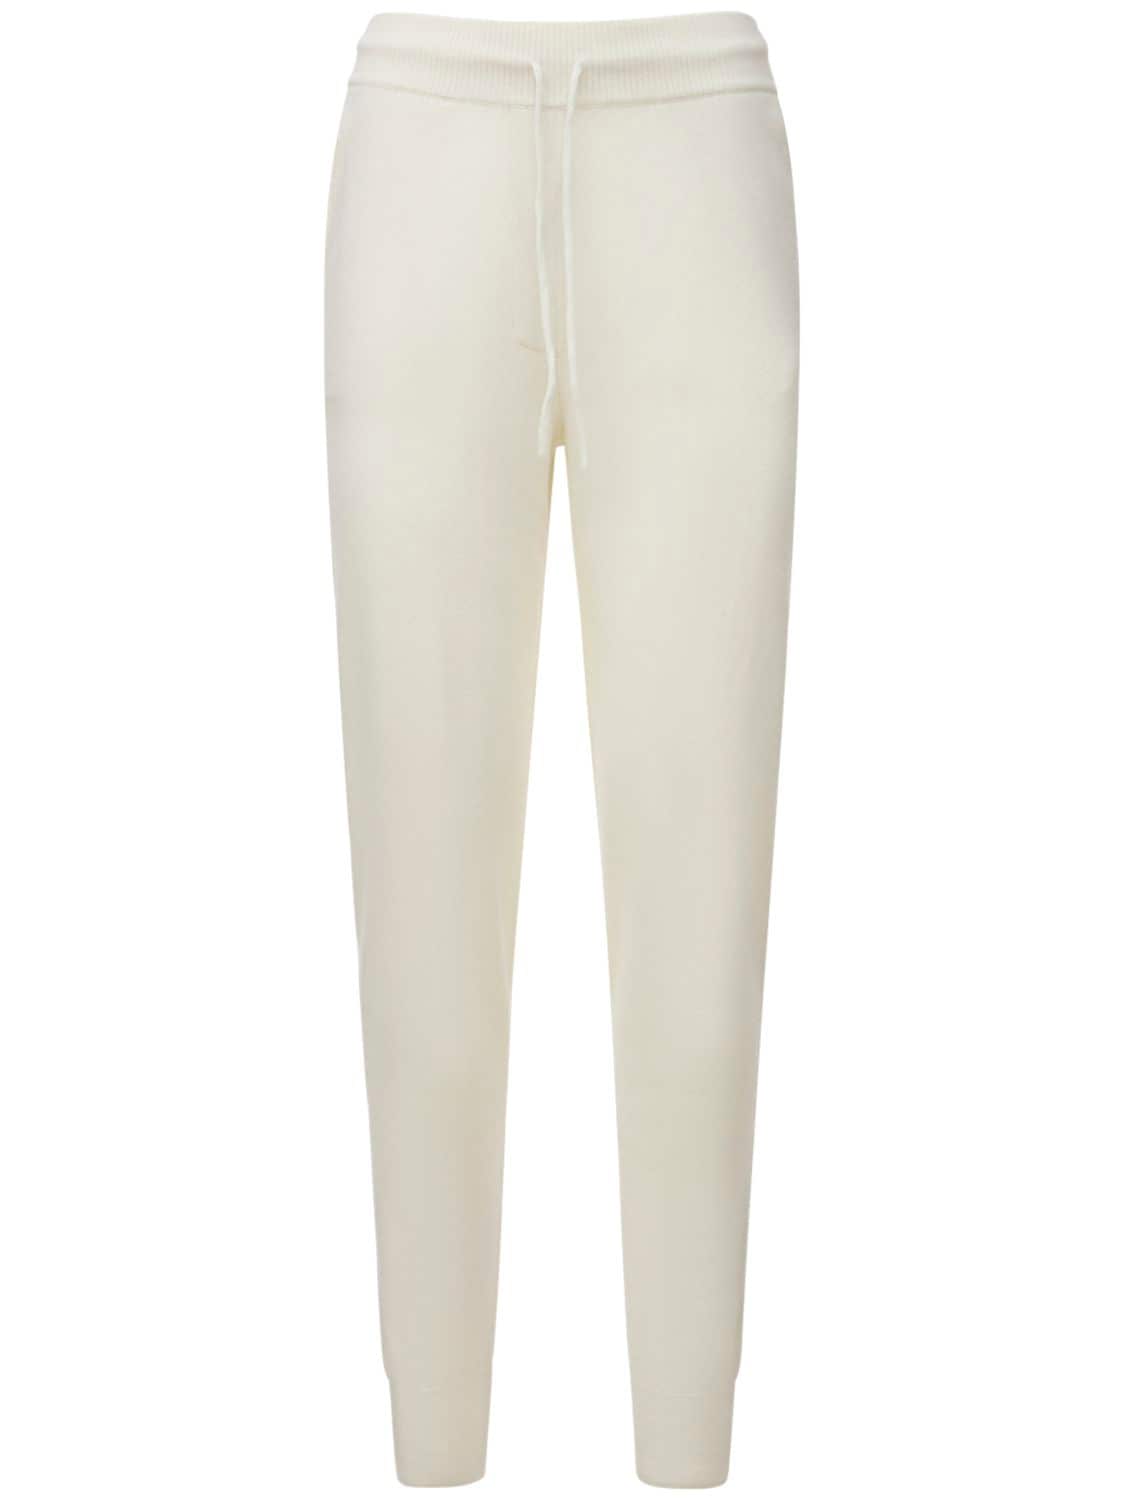 Loulou Studio Maddalena Cashmere Knit Sweatpants In Ivory